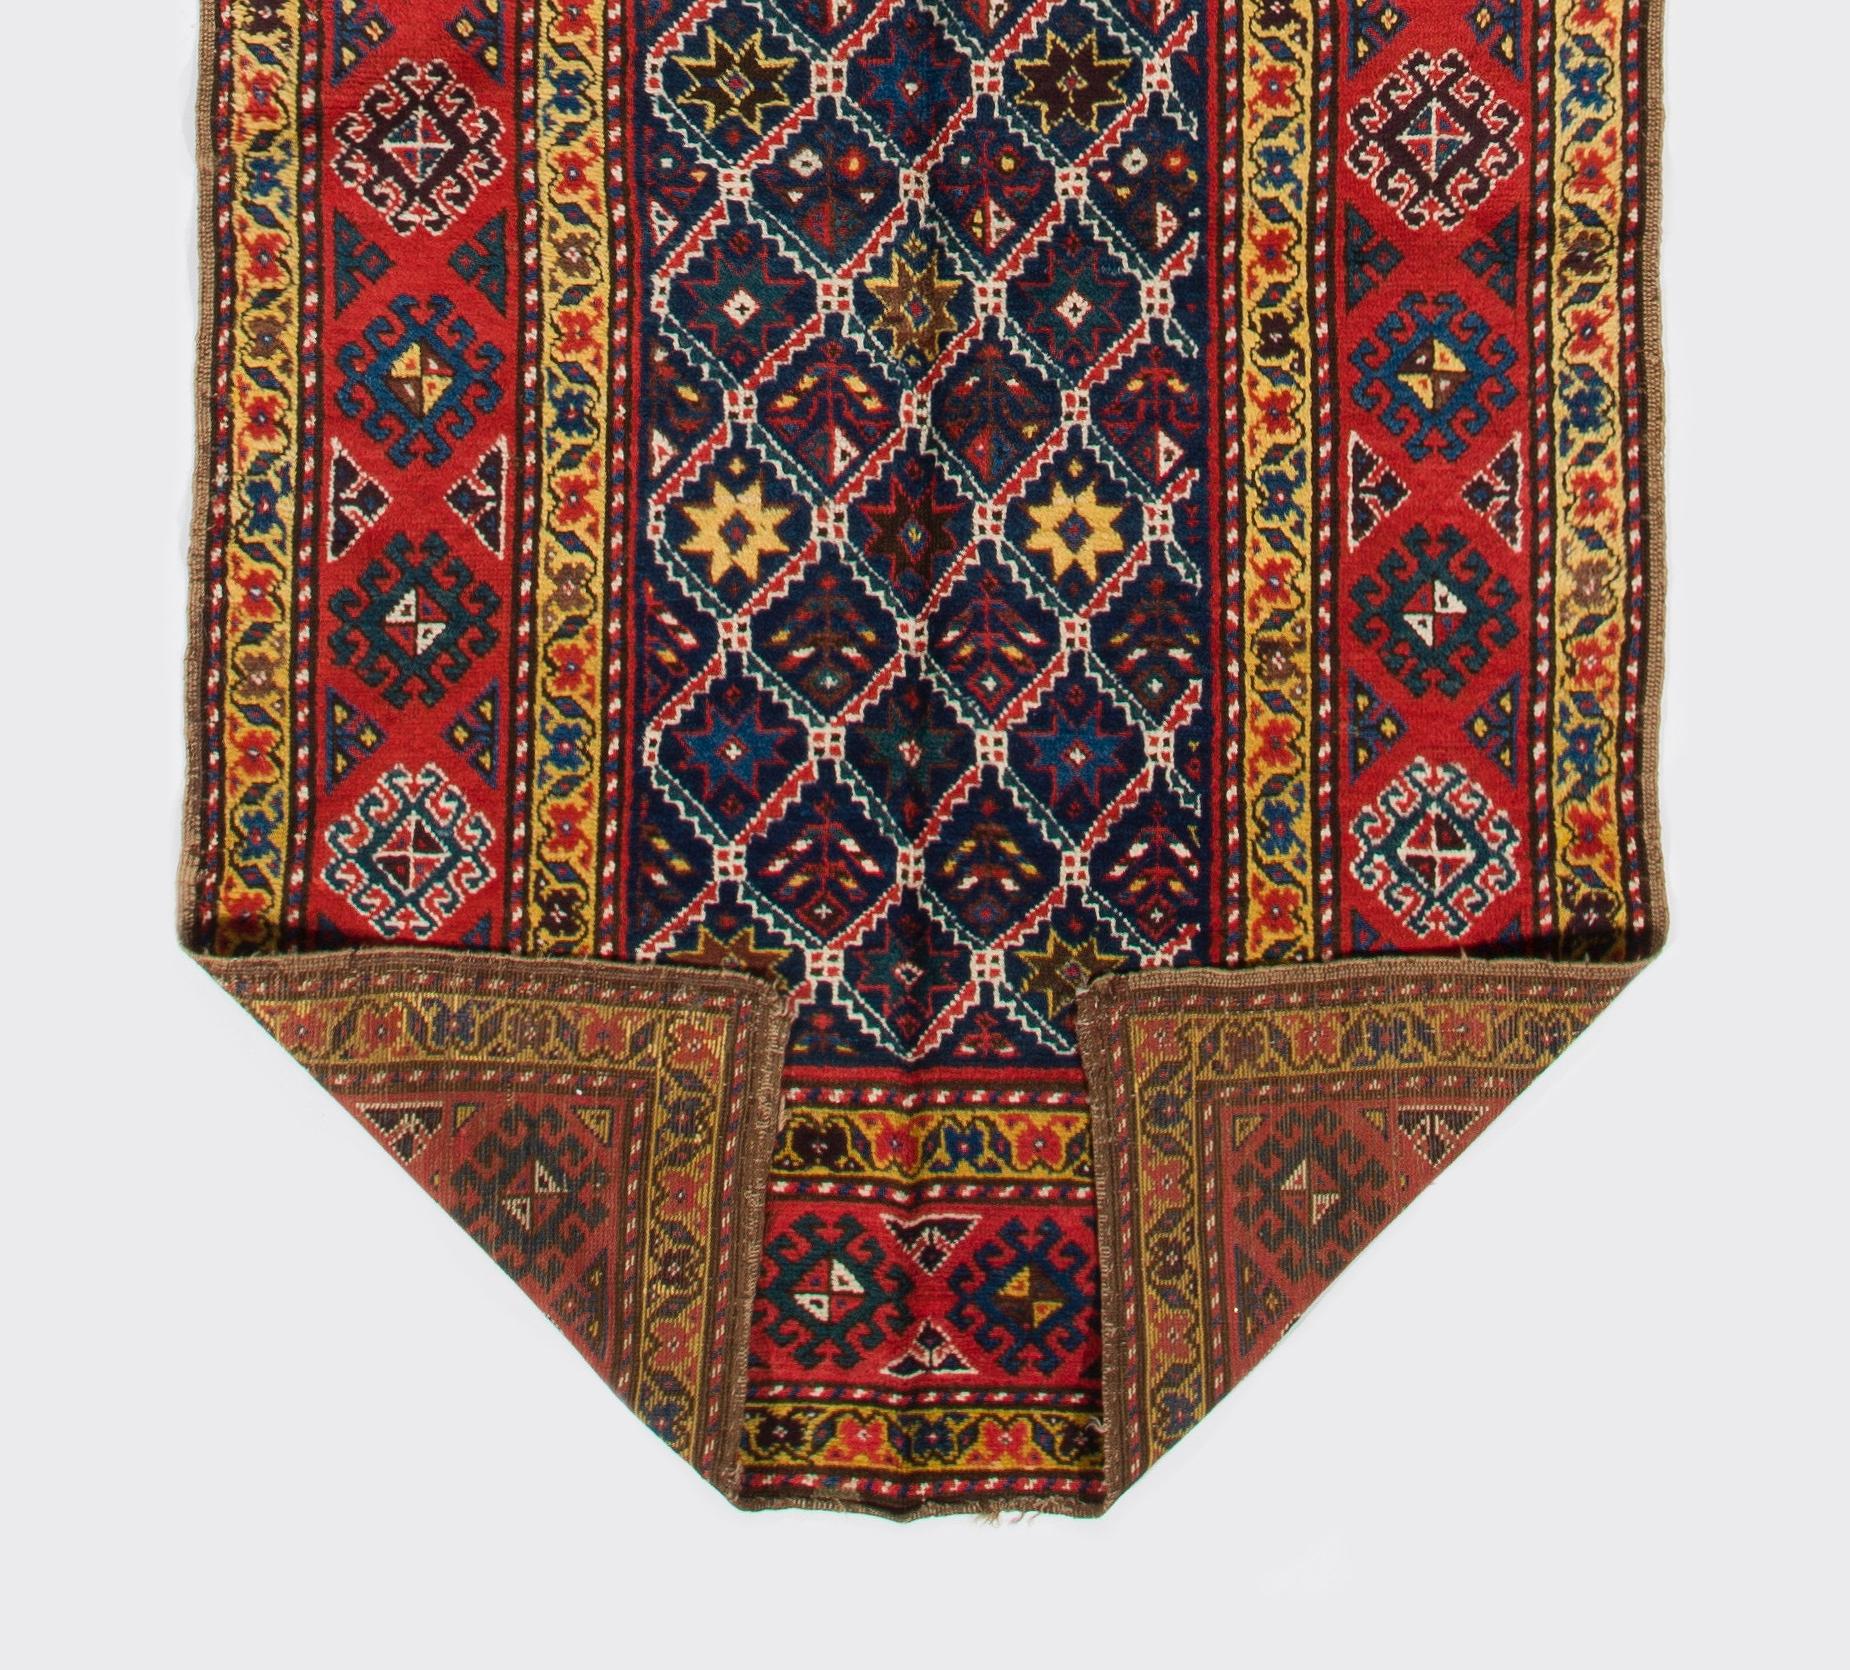 Antique Caucasian Talish Runner Rug, Late 19th Century, 100% Wool In Excellent Condition For Sale In Philadelphia, PA